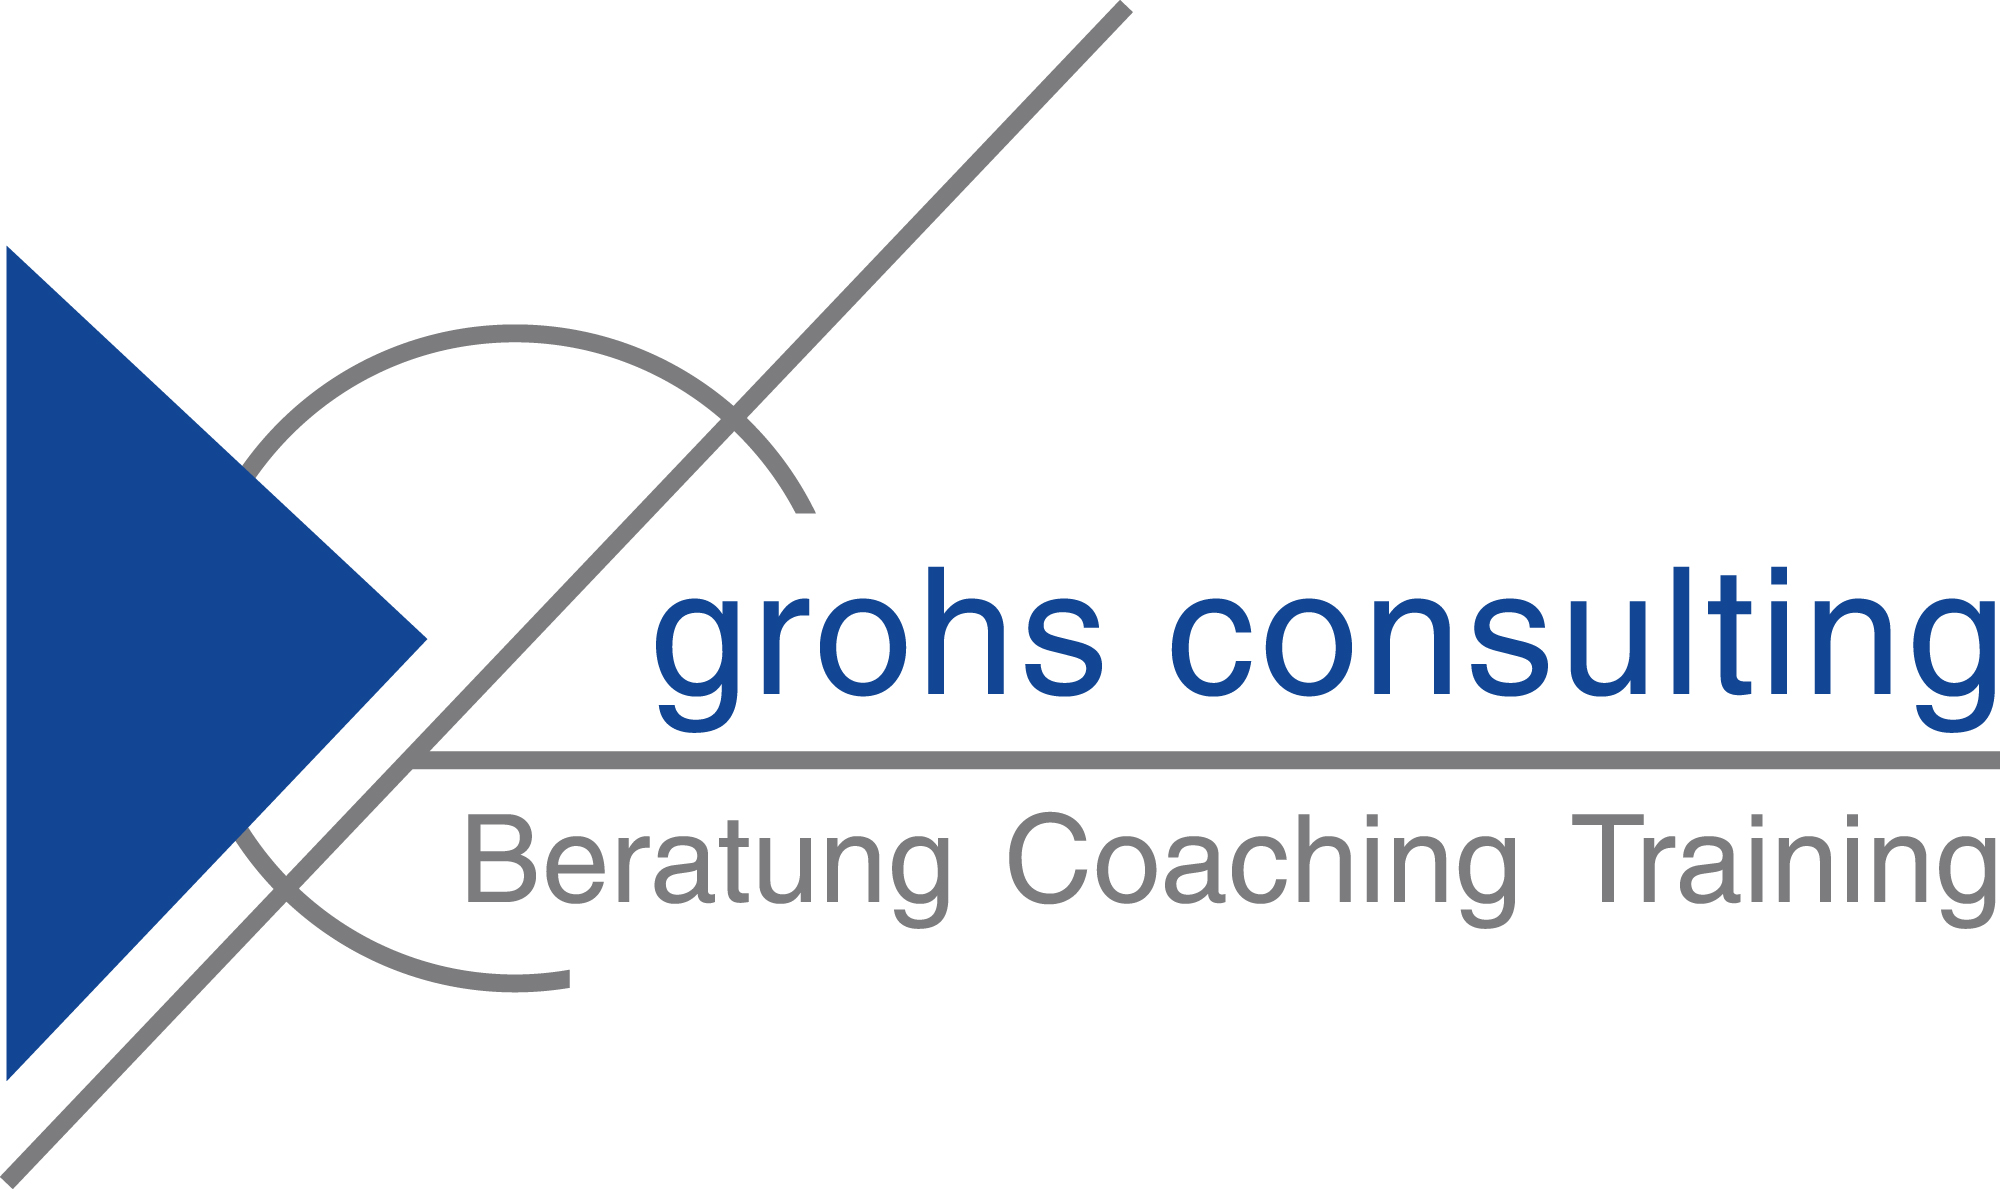 grohs consulting